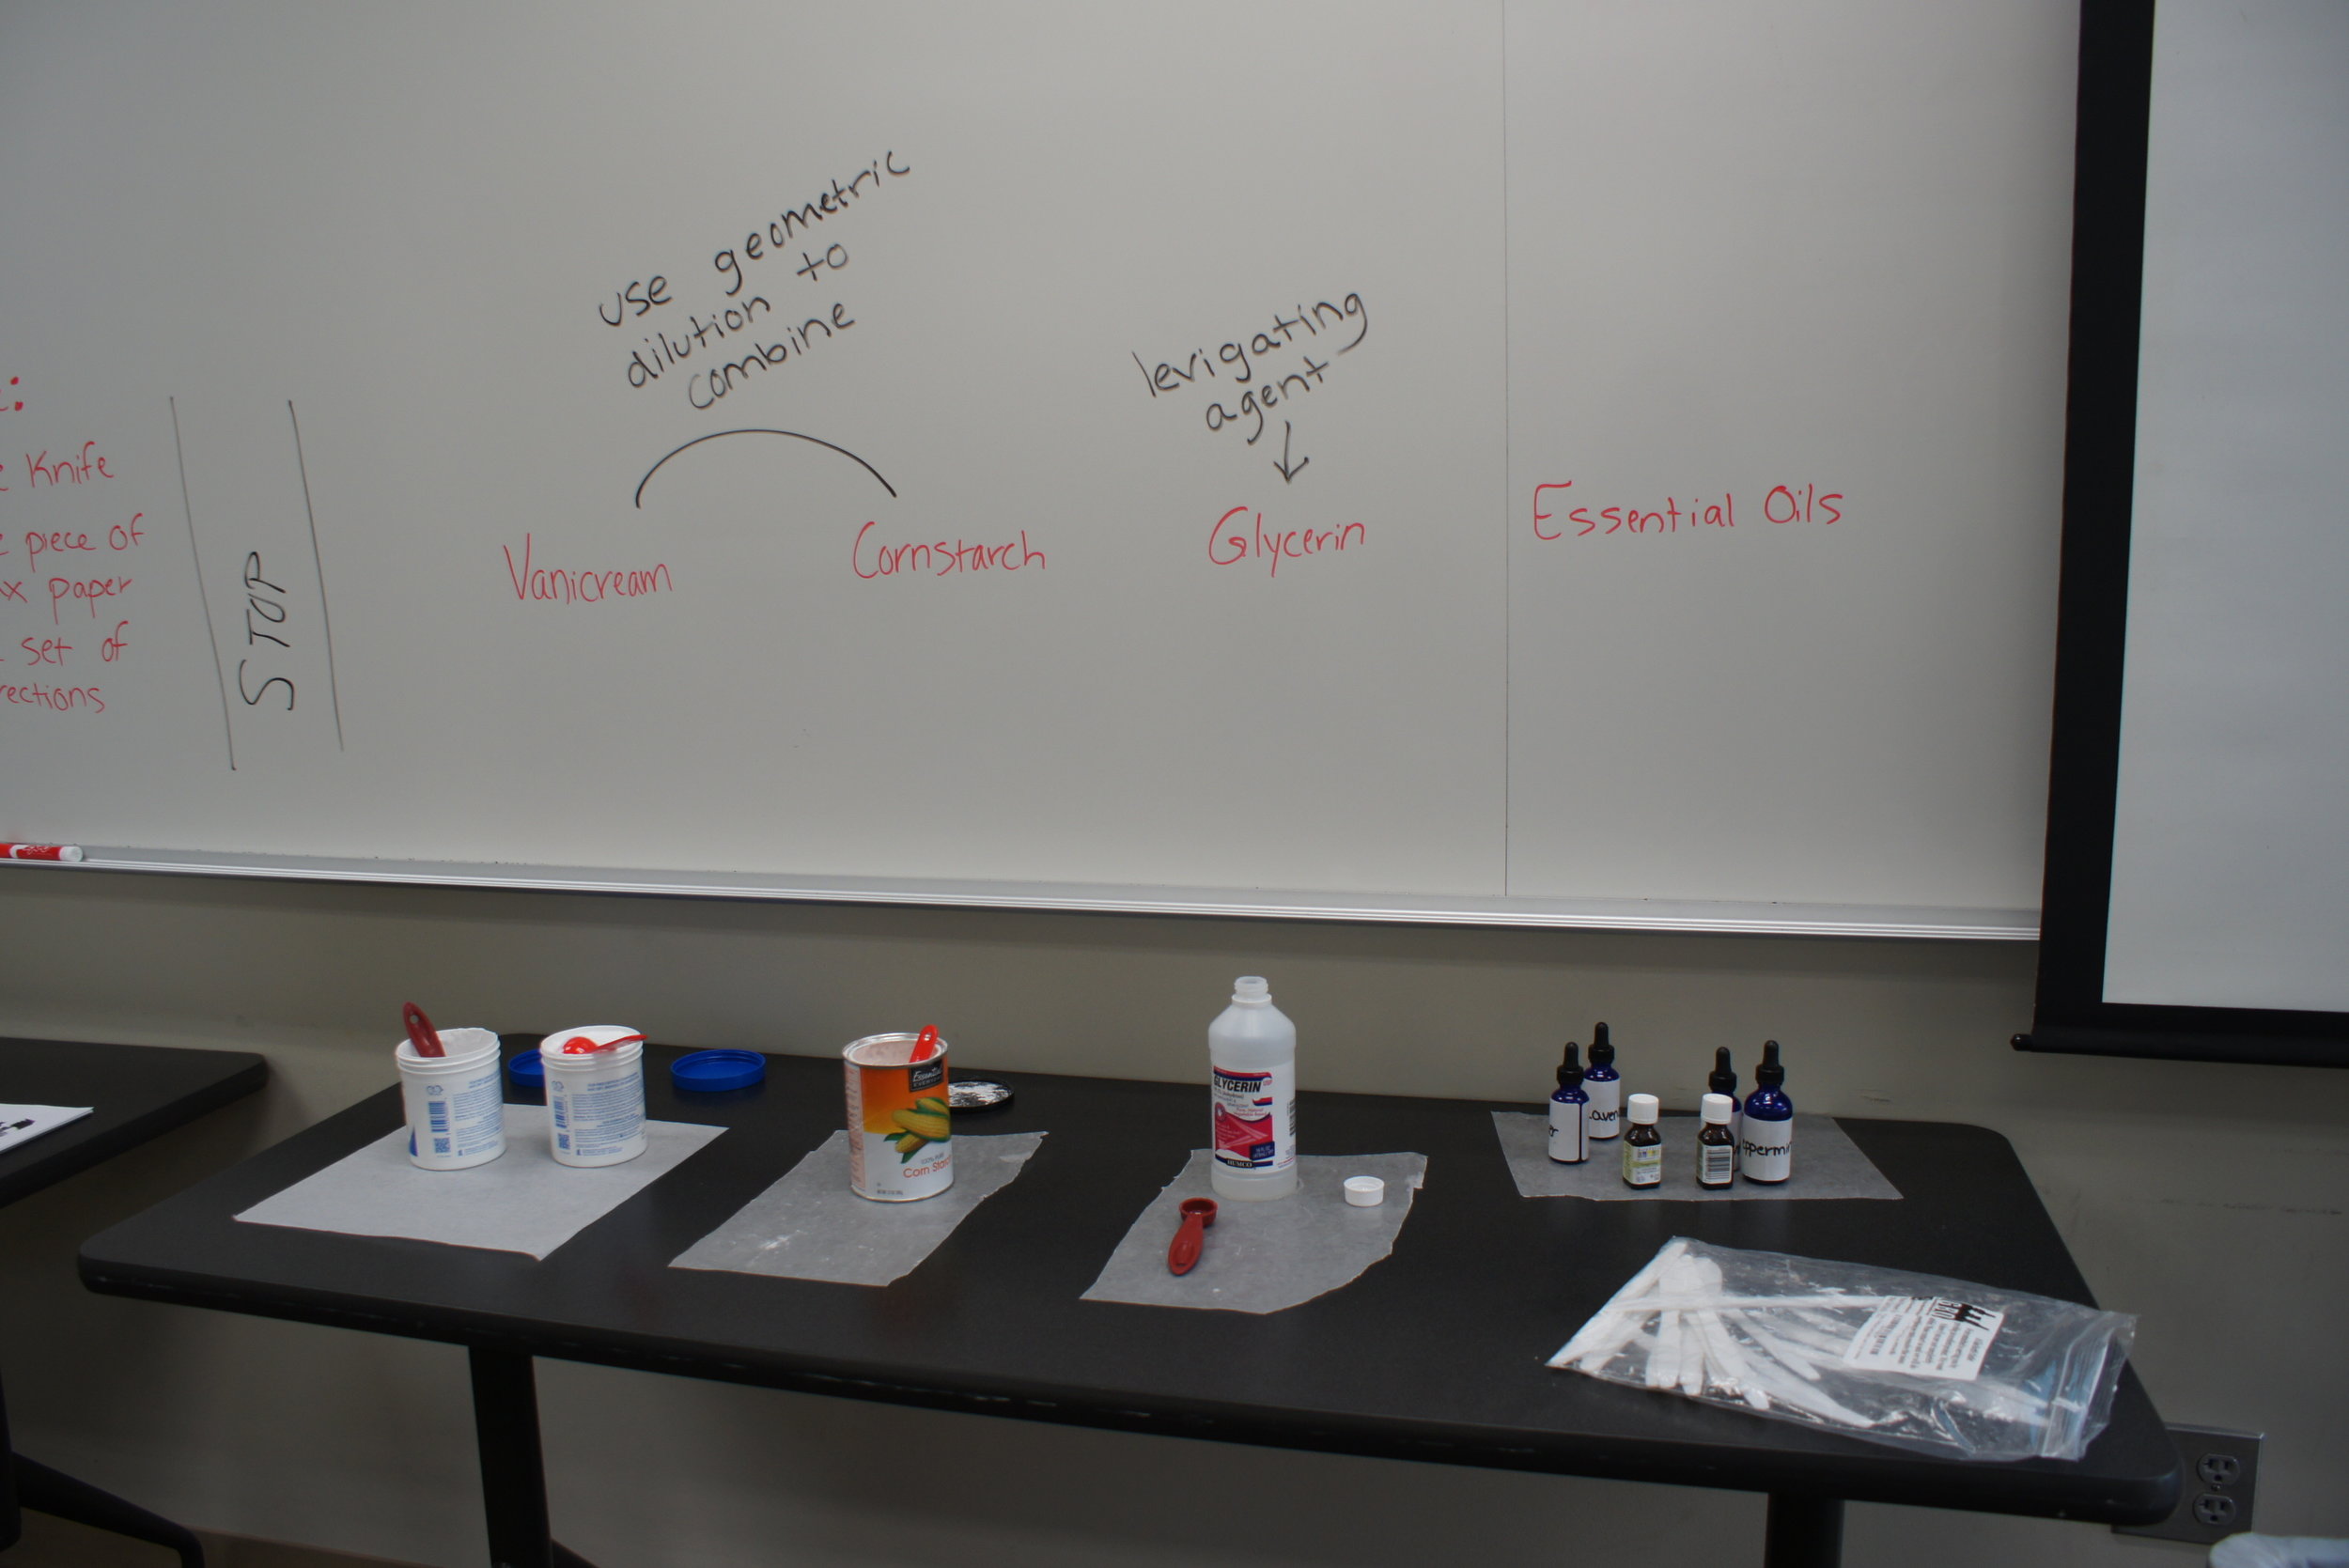   Shannon Greely, Recruiting Coordinator at the University of Minnesota College of Pharmacy, talked to the students about the timeline for pharmacy school and what to expect in a pharmacy career. Students also completed a hands-on compounding activit